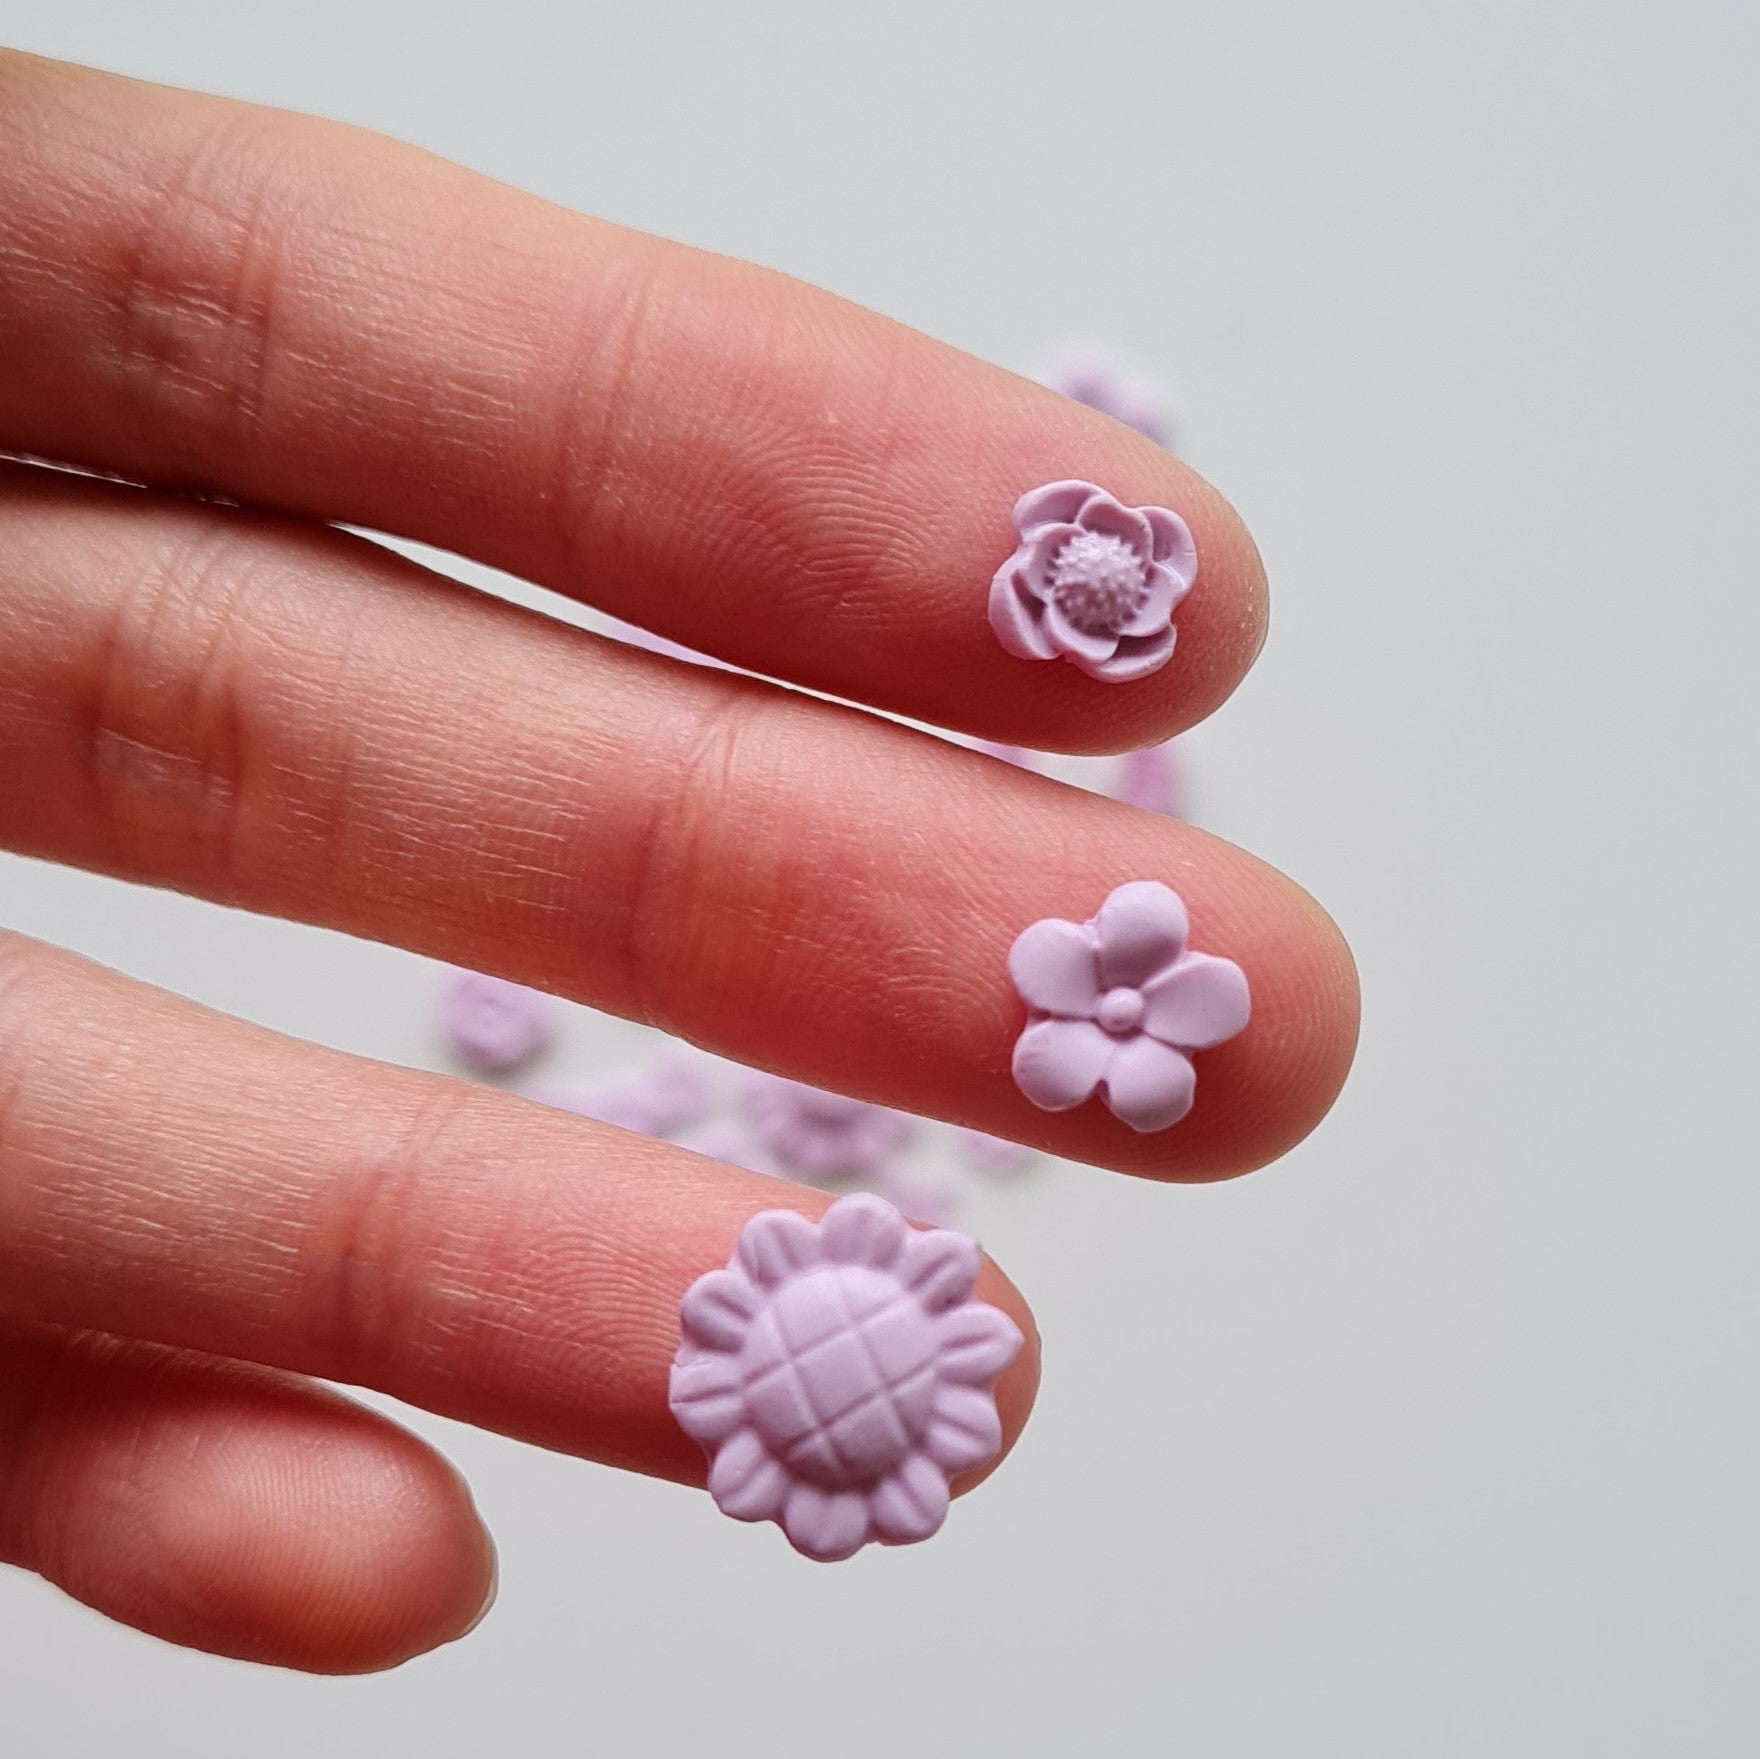 Mini Flowers Assorted 6 - Silicone Mould